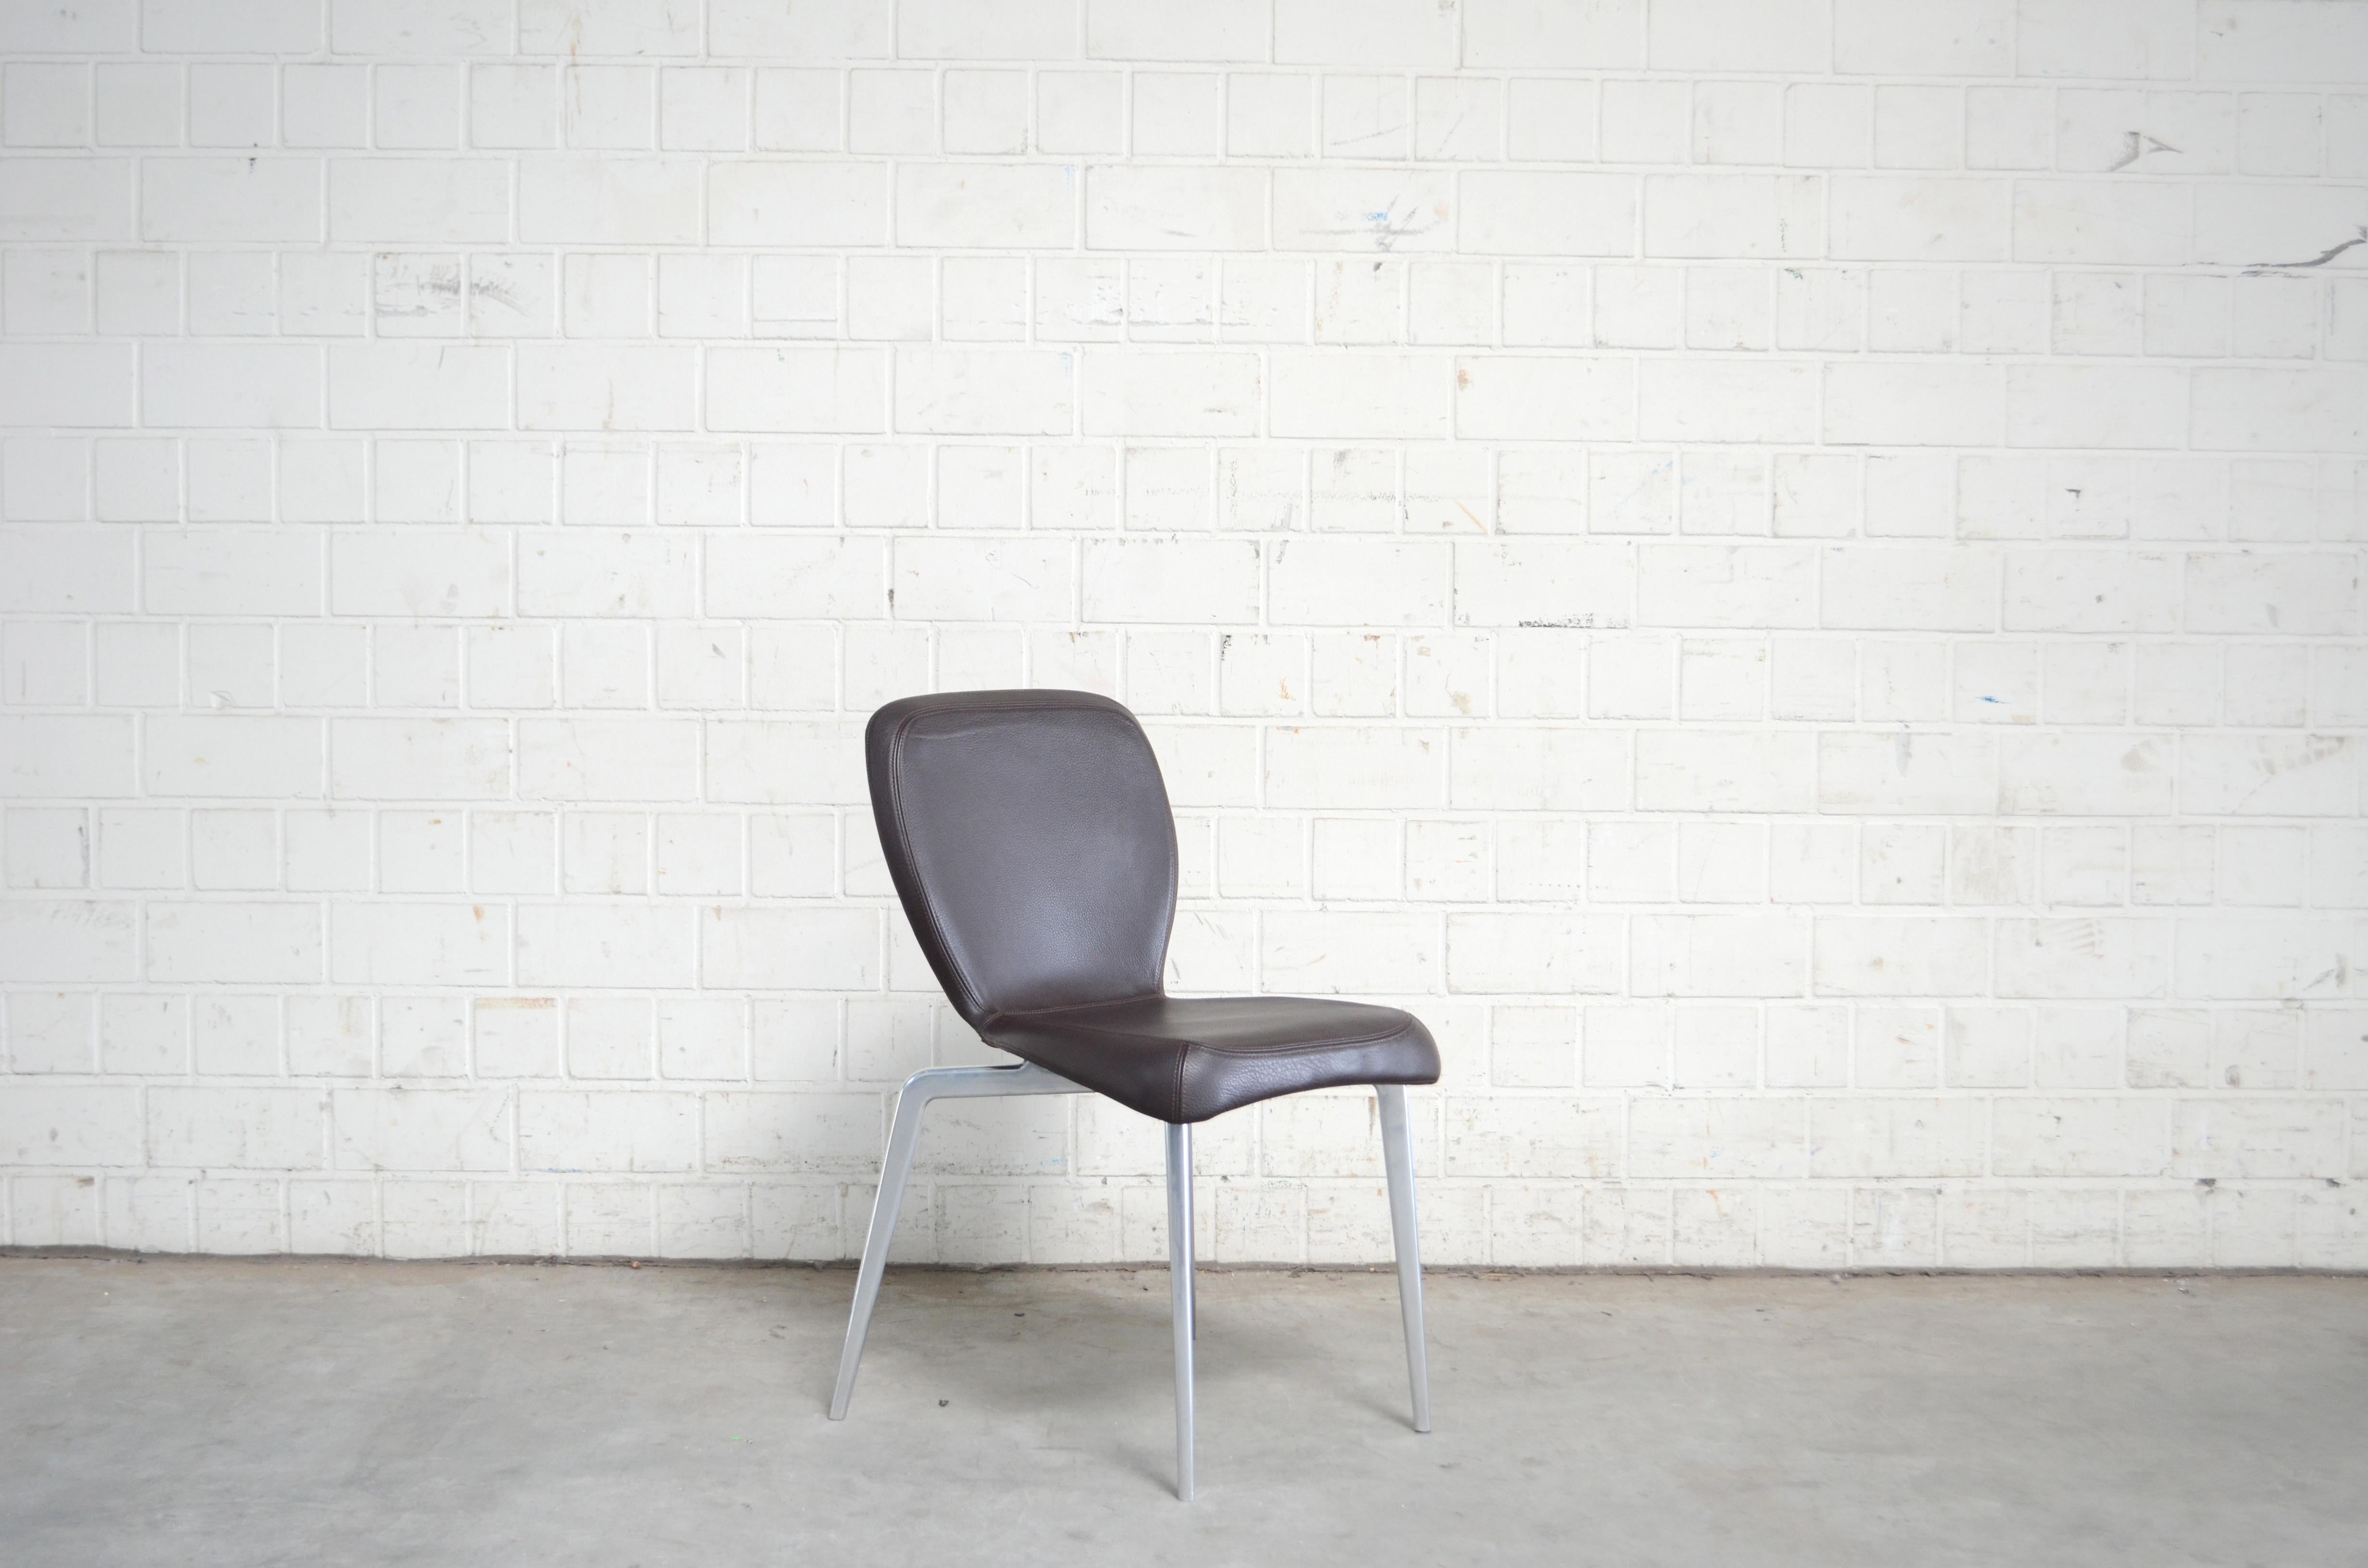 Model Munich chair designed by Sauerbruch Hutton.
Manufactured by ClassiCon.
This object is a rare and unique prototype with a aluminium feet base that never was available on the market.
Usually you find only version with wood on the